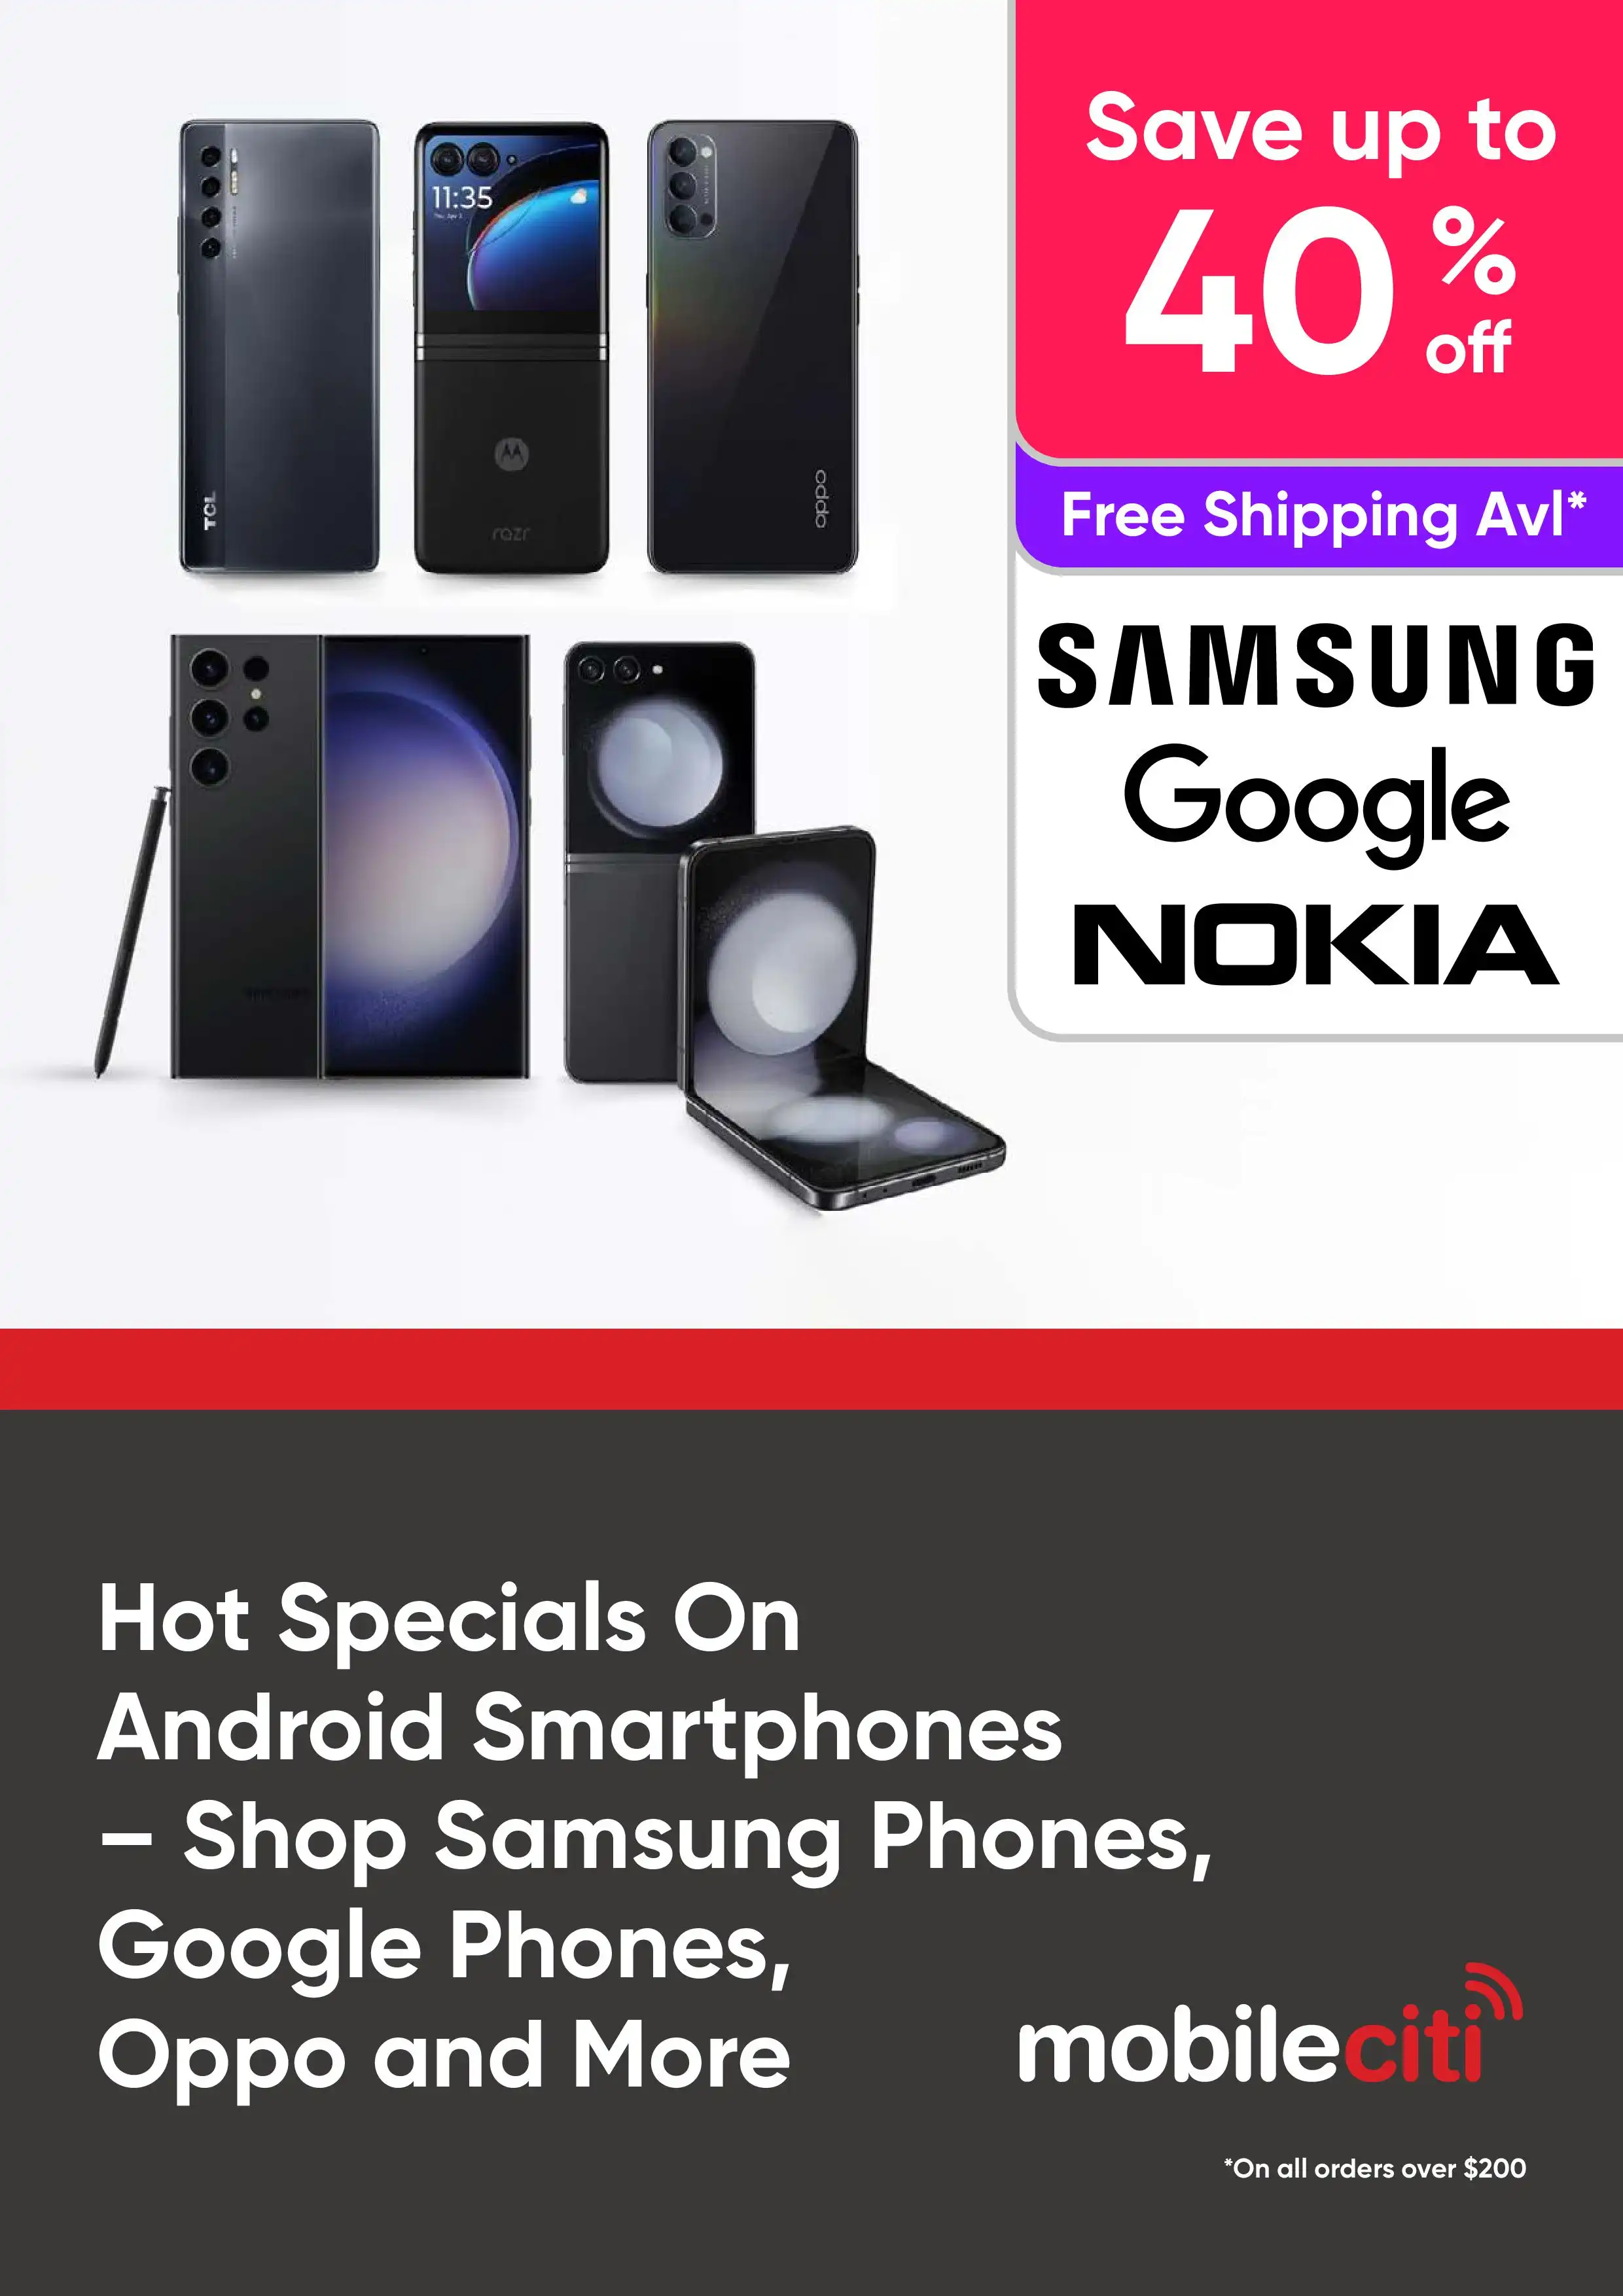 Hot Specials On Android Smartphones - Save Up to 40% Off Samsung Phones, Google Phones, Oppo and More